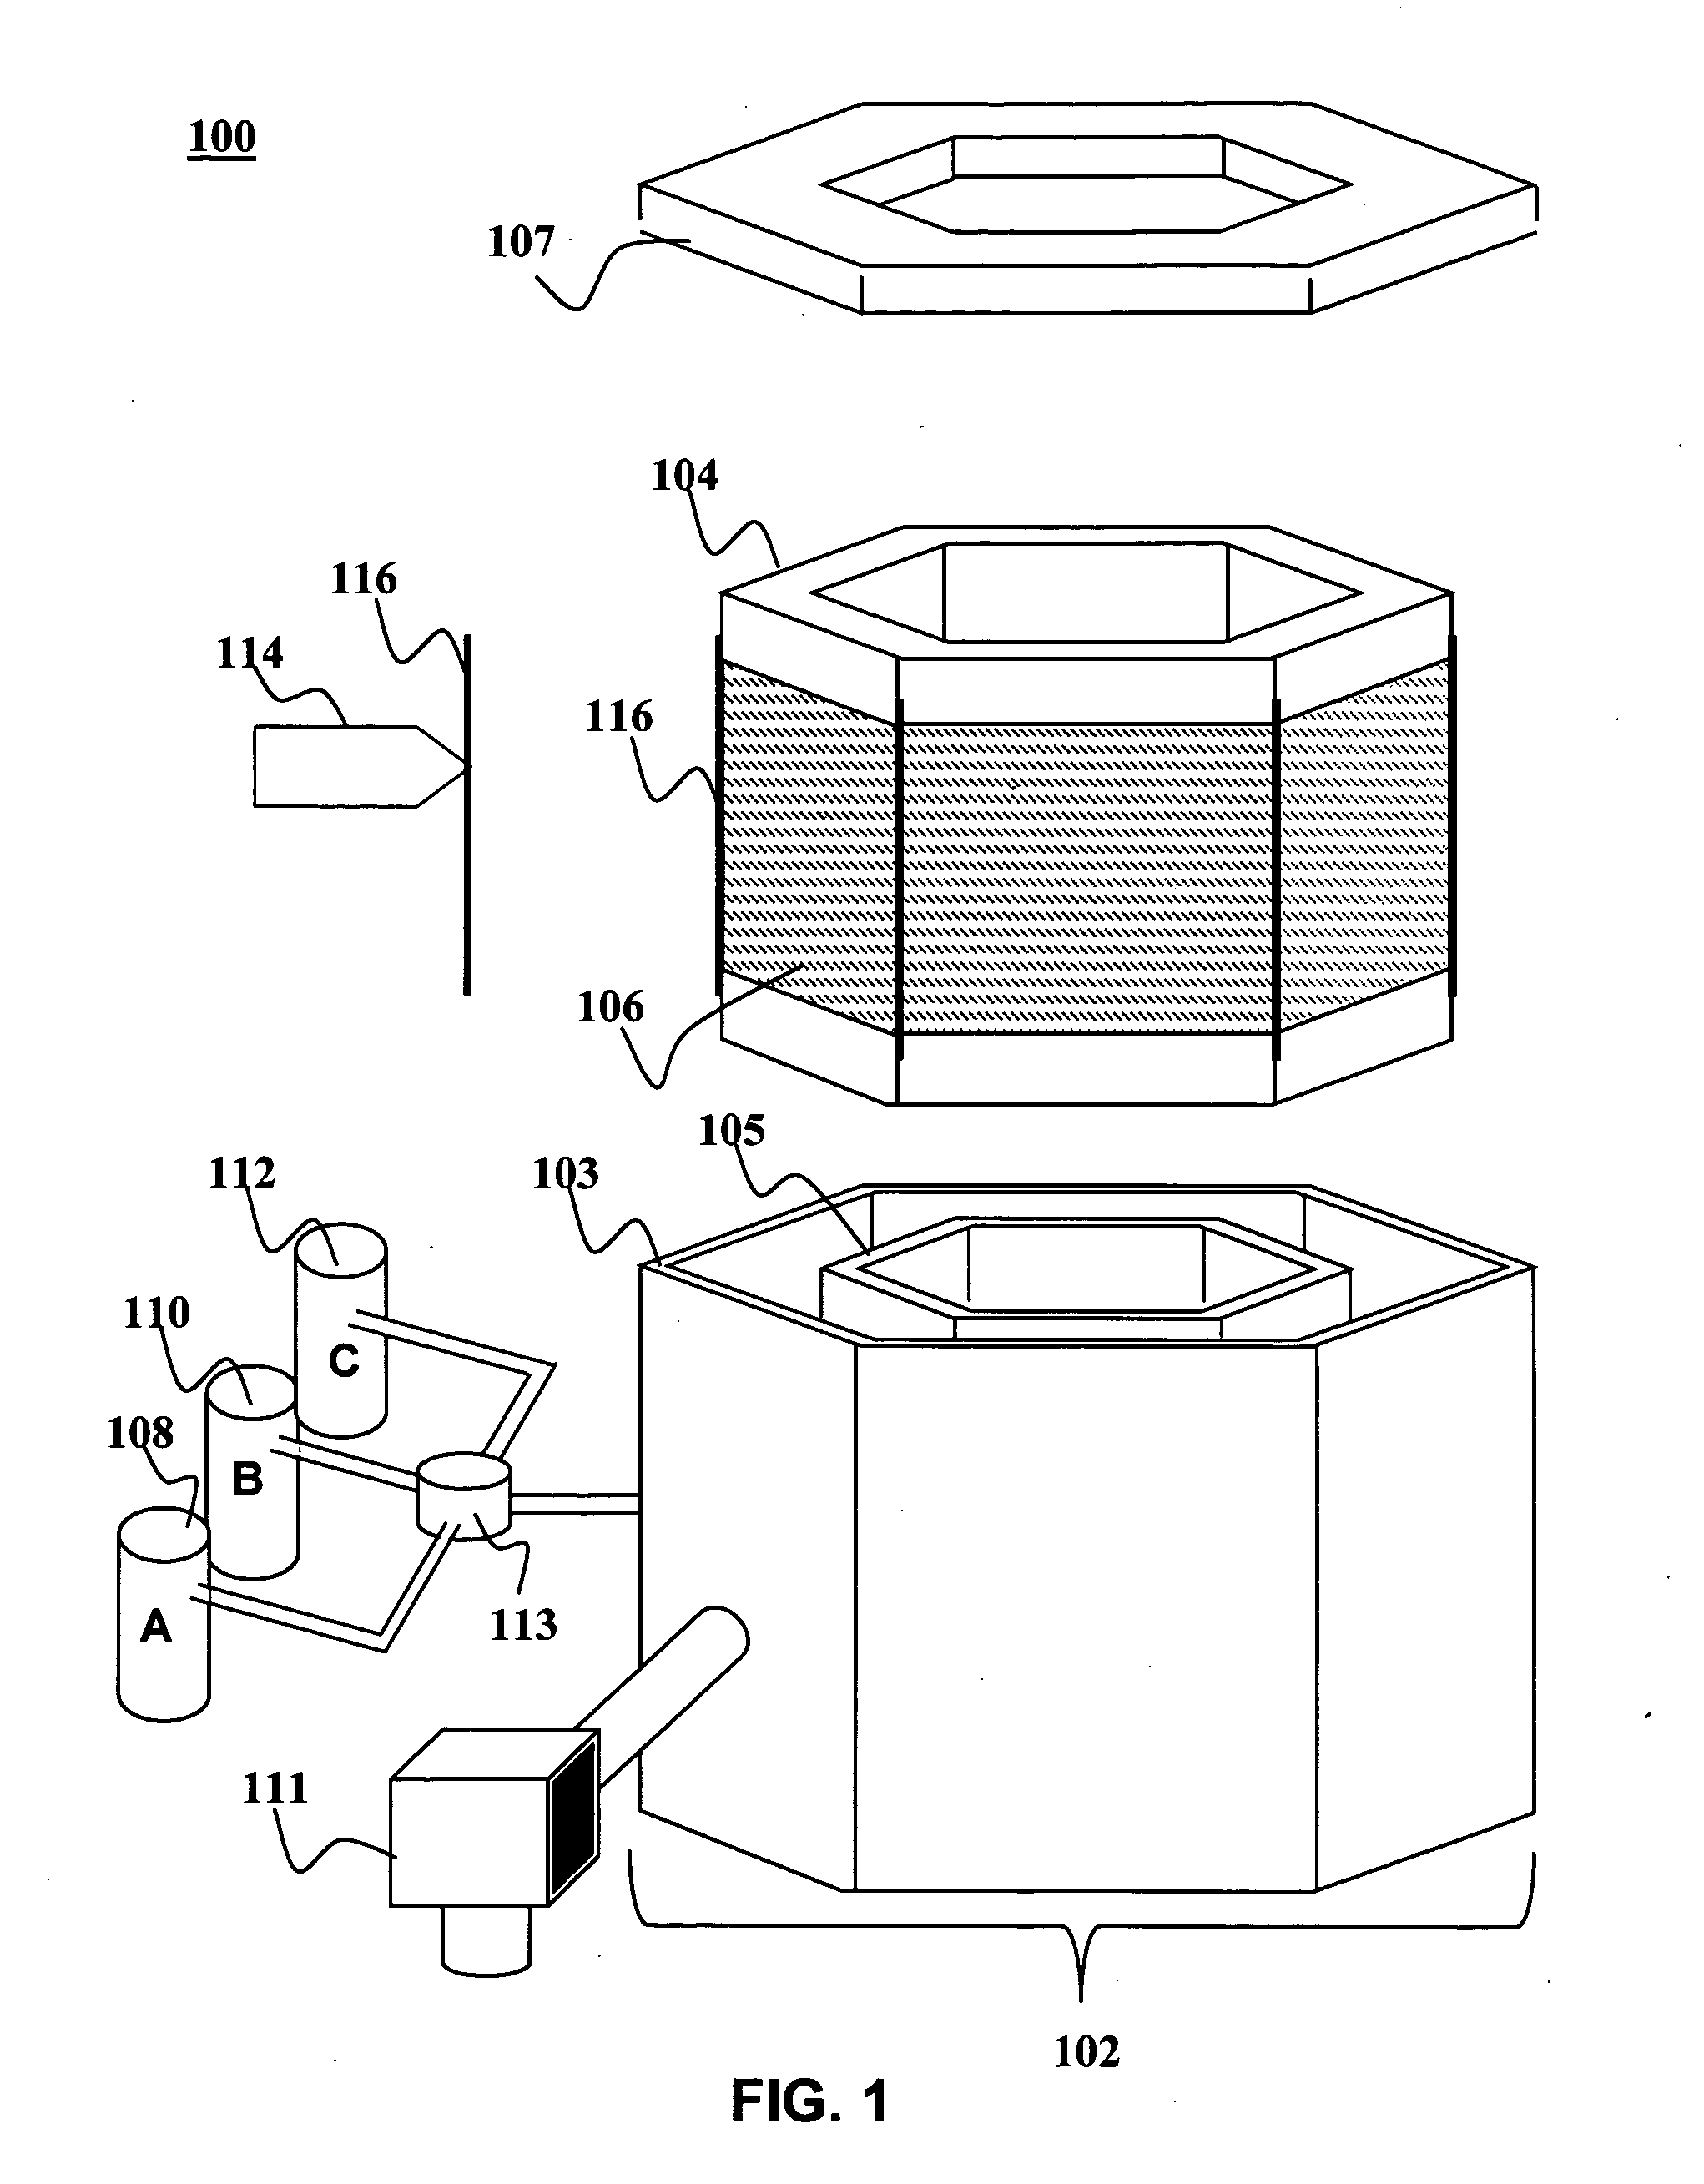 Formation of CIGS absorber layer materials using atomic layer deposition and high throughput surface treatment